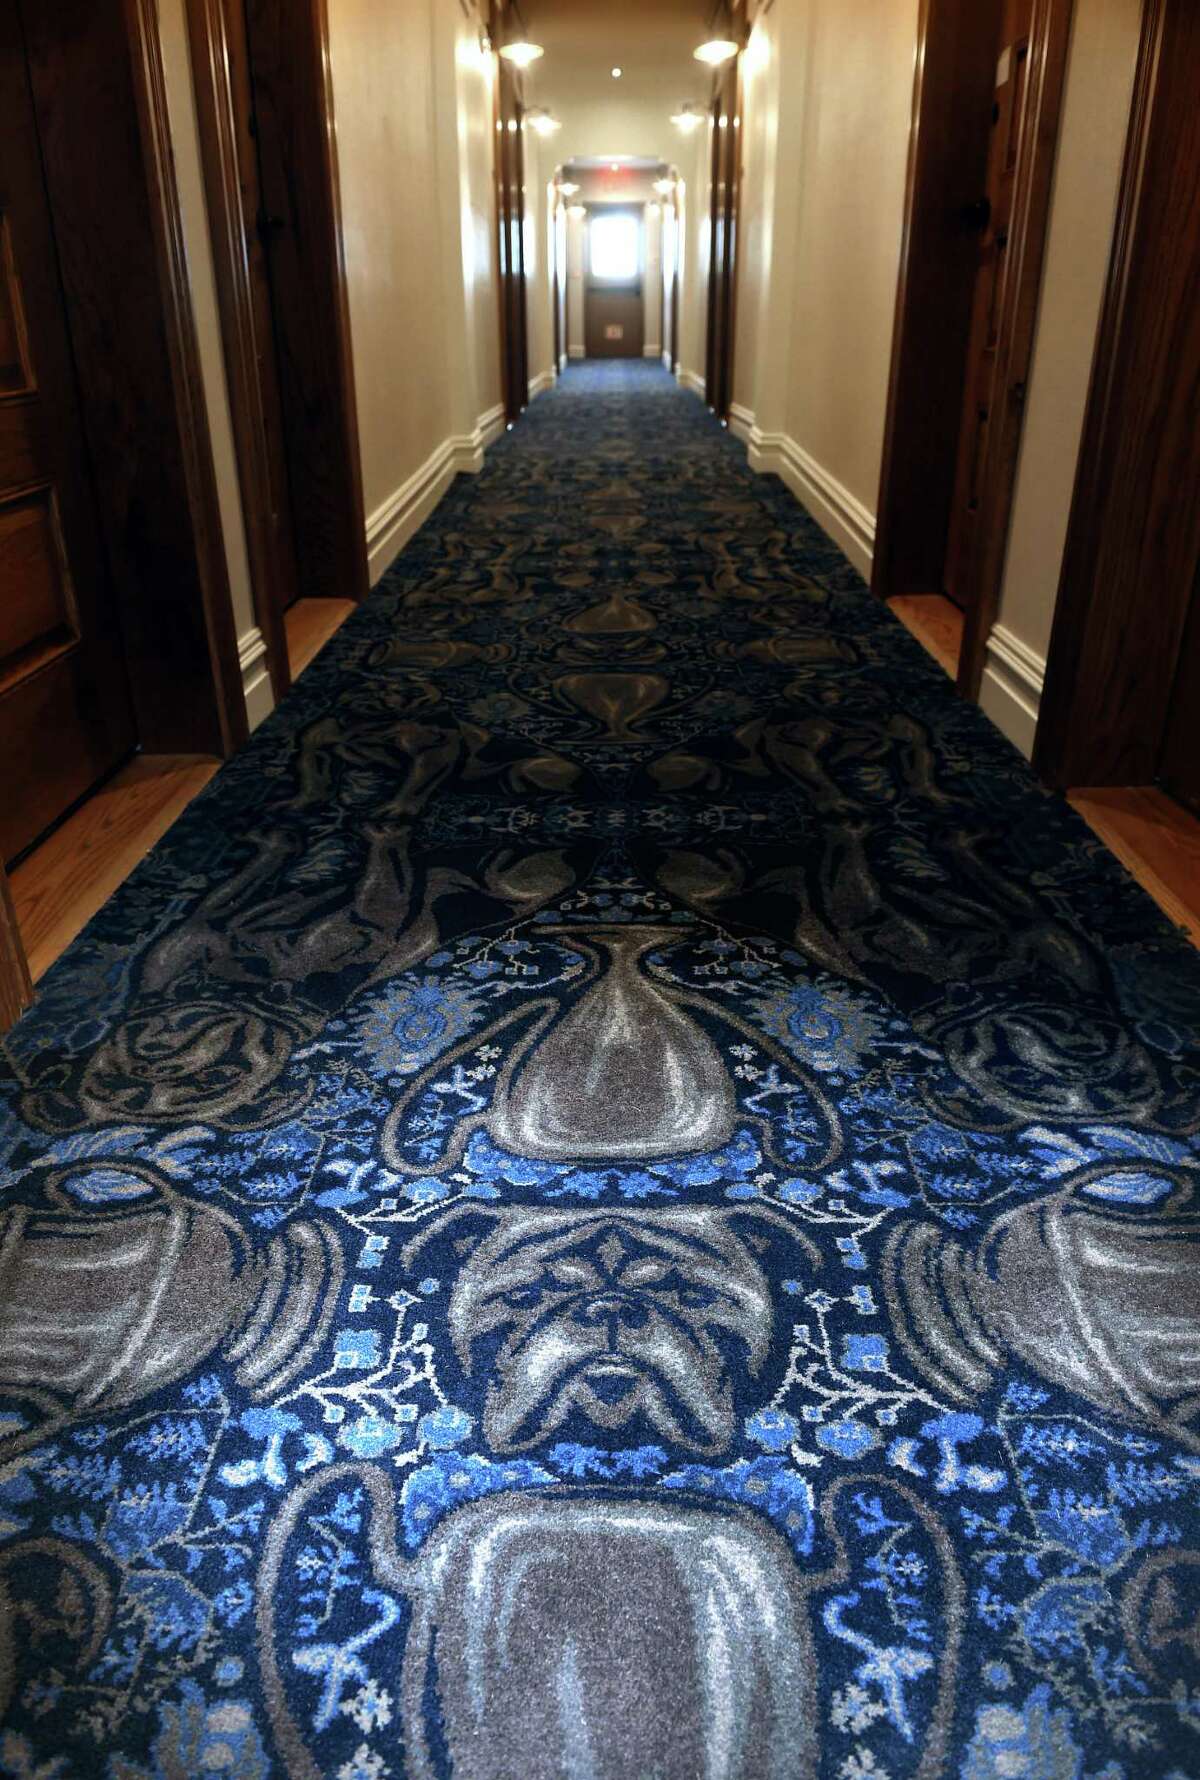 The Yale University mascot, Handsome Dan, as well as Mory’s Cups decorate custom-made carpeting in the hallways at the Graduate Hotel, formerly the Hotel Duncan, on Chapel Street in New Haven on October 2, 2019.